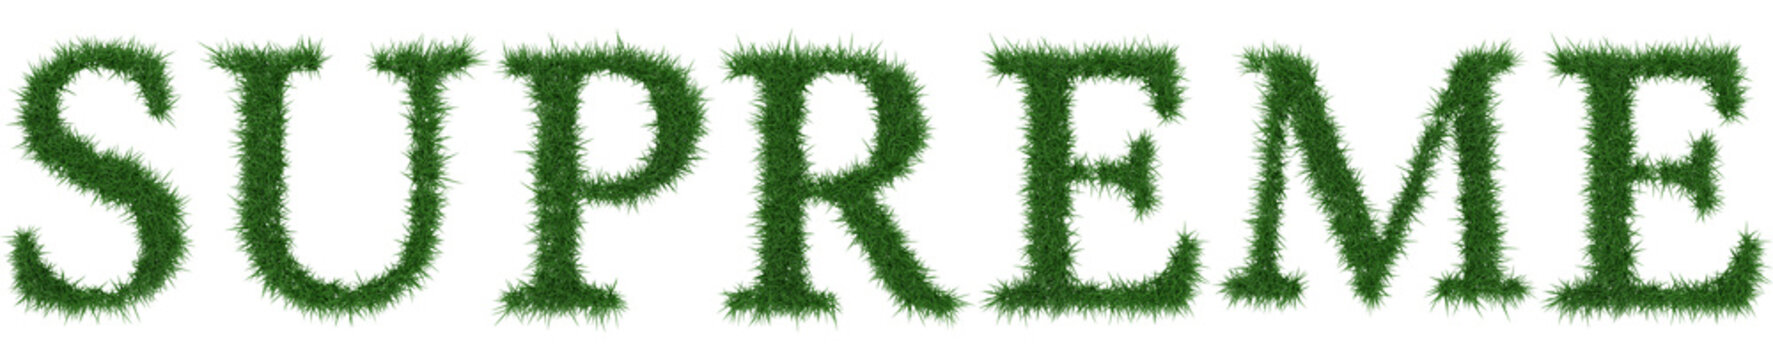 Supreme - 3D rendering fresh Grass letters isolated on whhite background.